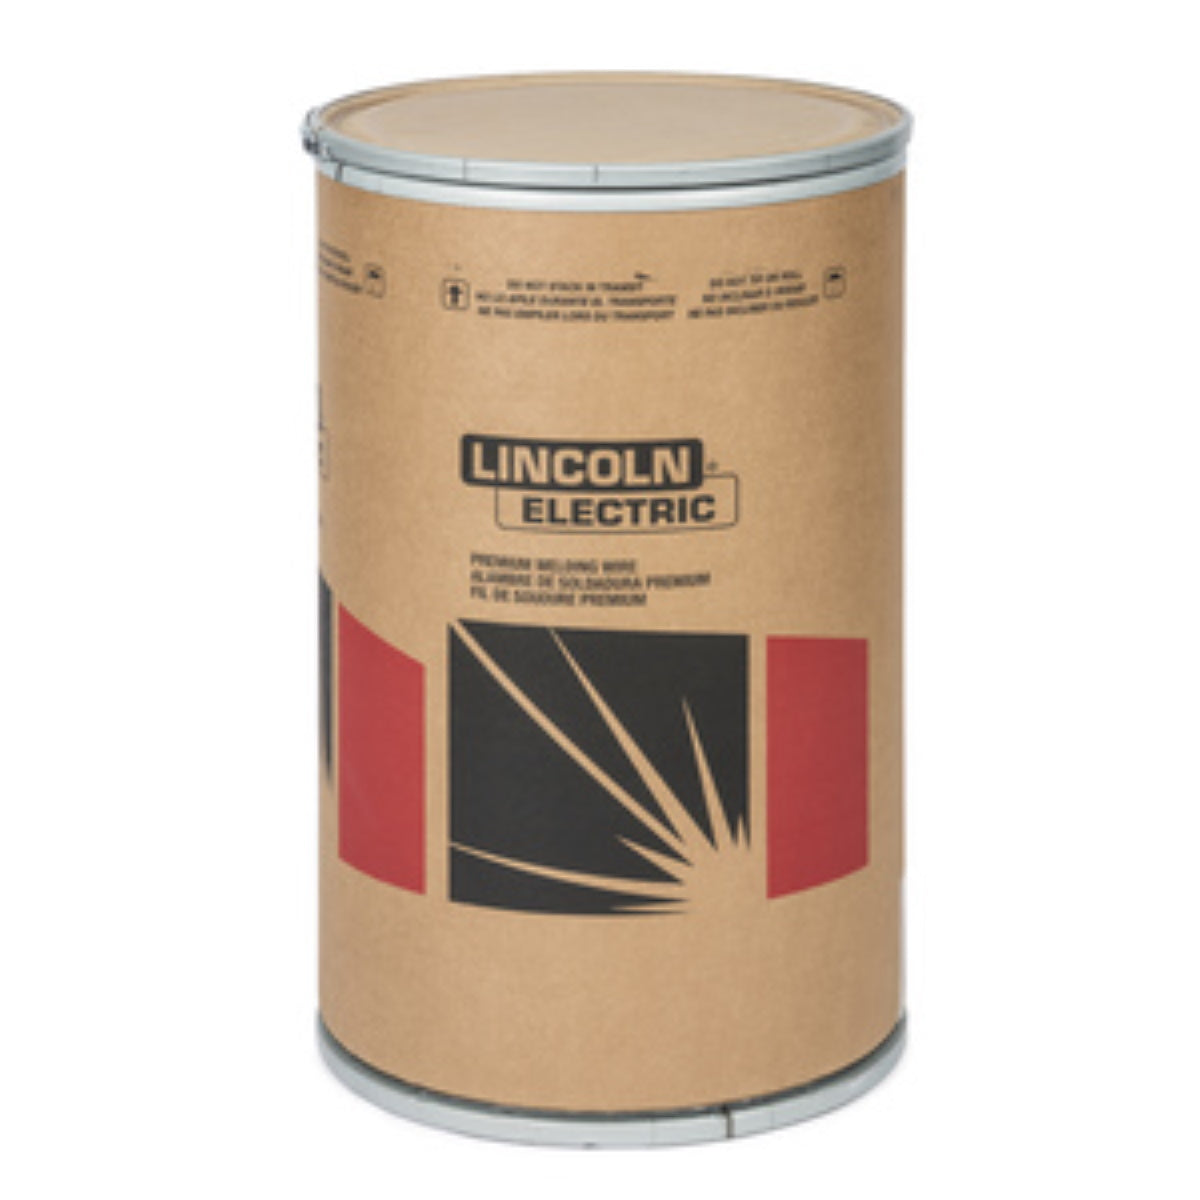 Lincoln Murex 308LSI Stainless MIG Wire .035 500lb Drum (ED0035604)